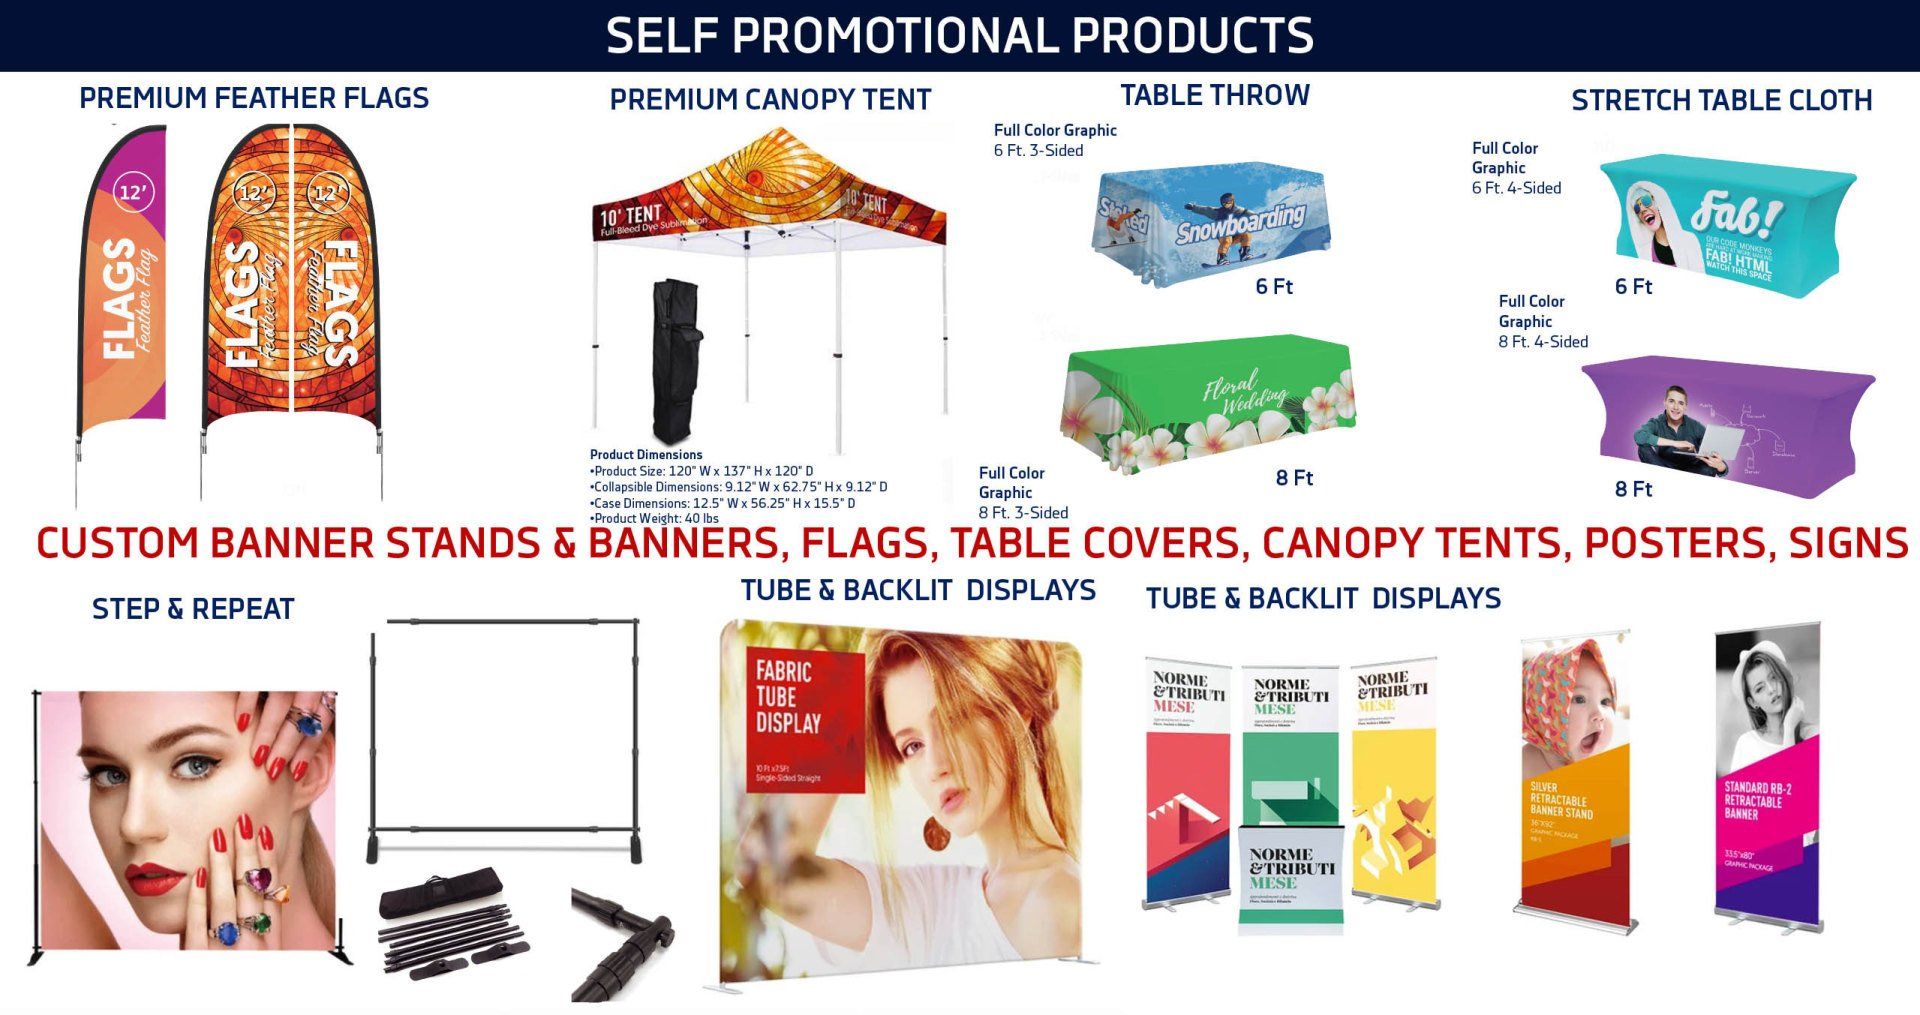 Self Promotional Products  — Large Format Printing Machine in Operation in Mission Viejo, CA